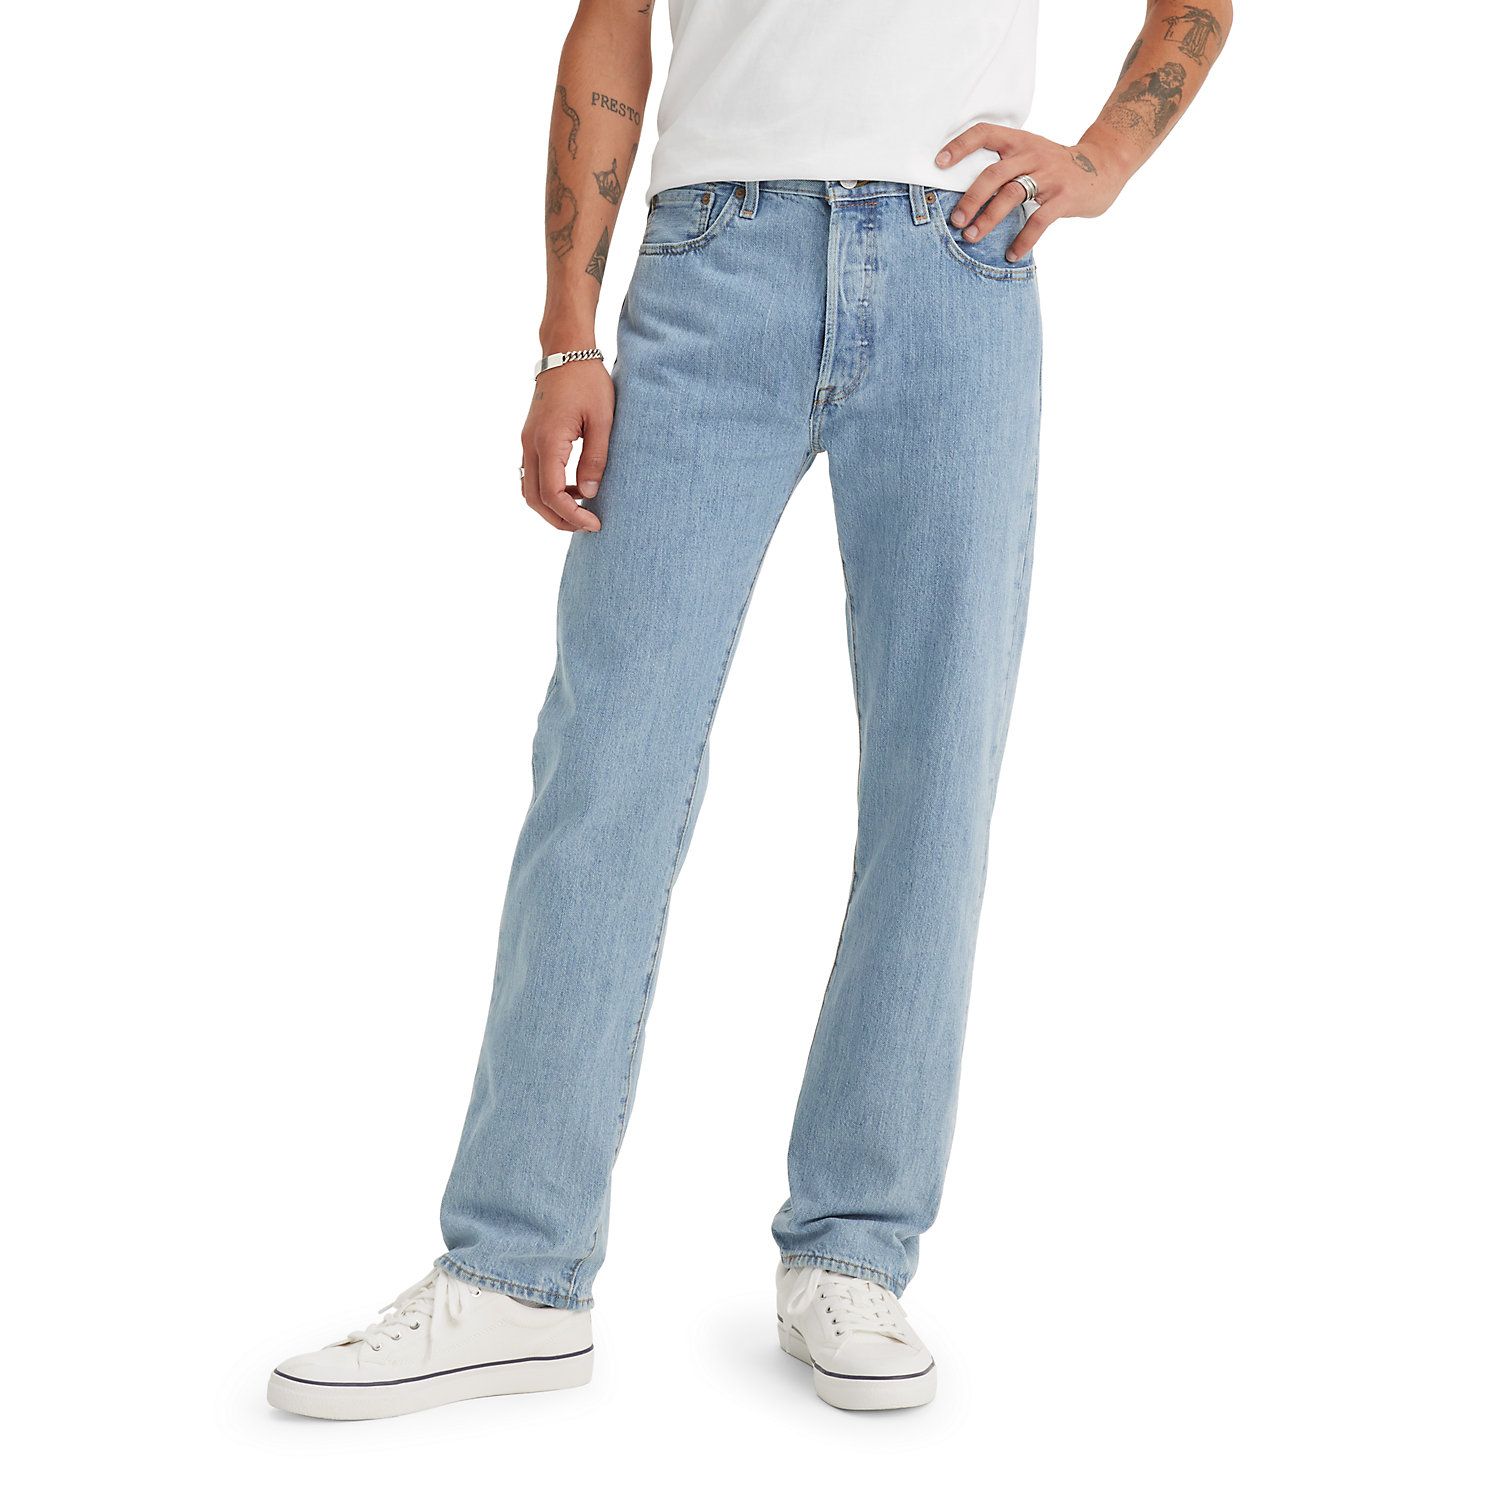 kohl's levi's 501 shrink to fit